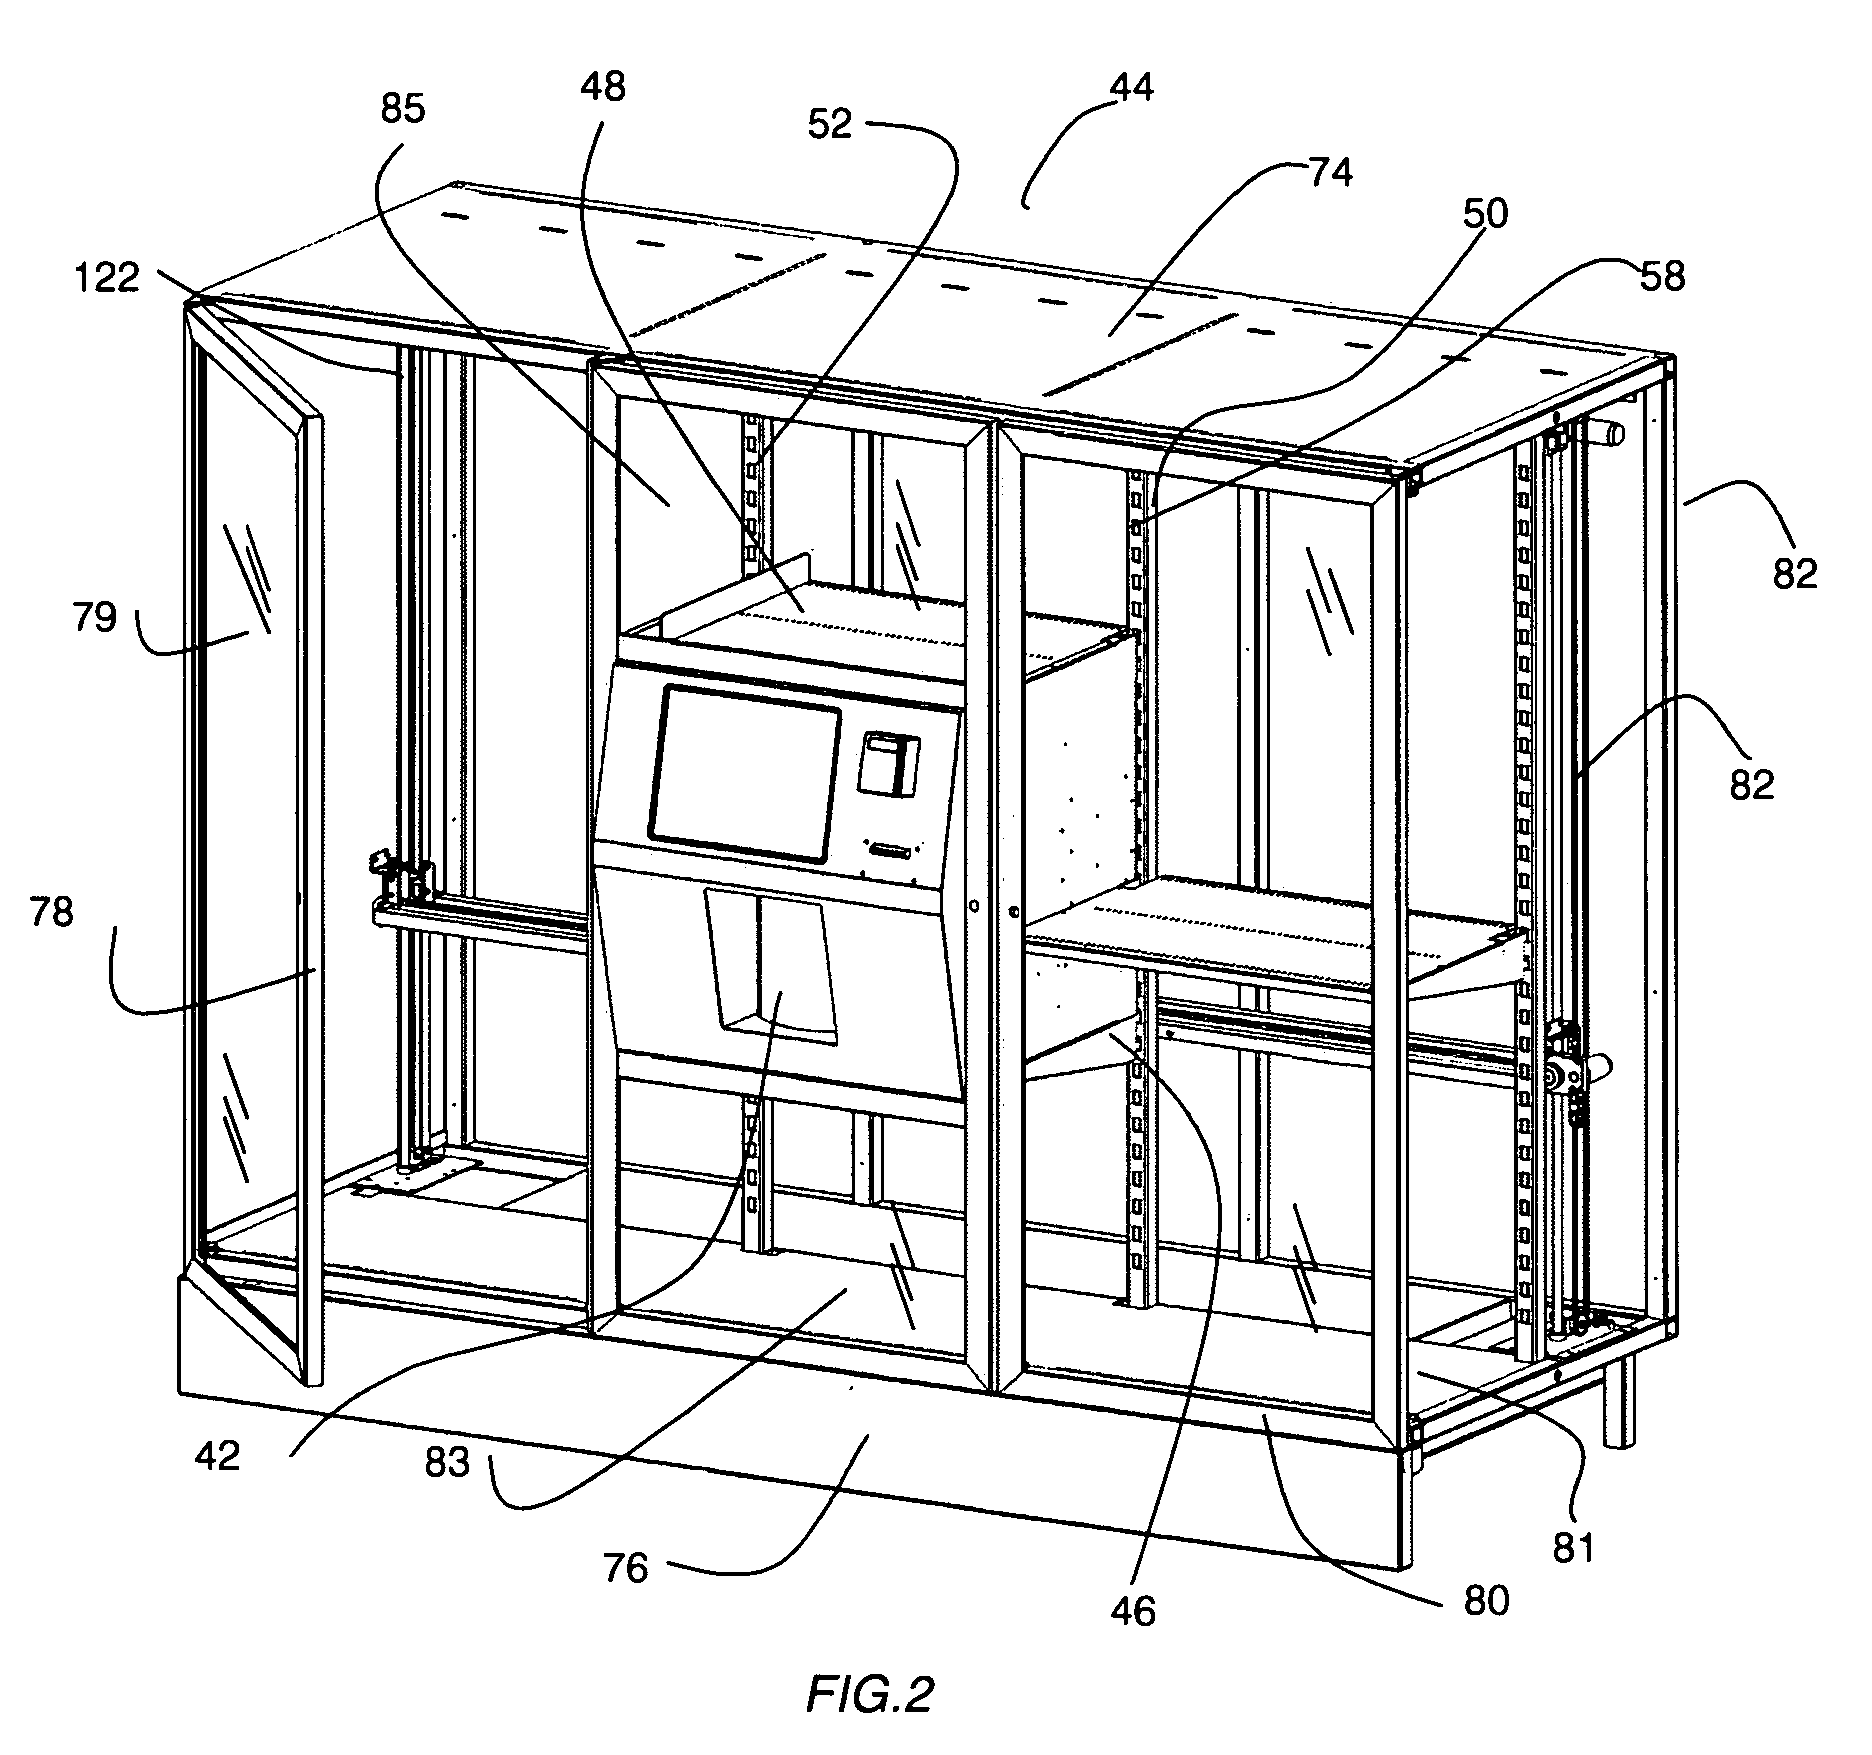 Article storage and retrieval apparatus and vending machine